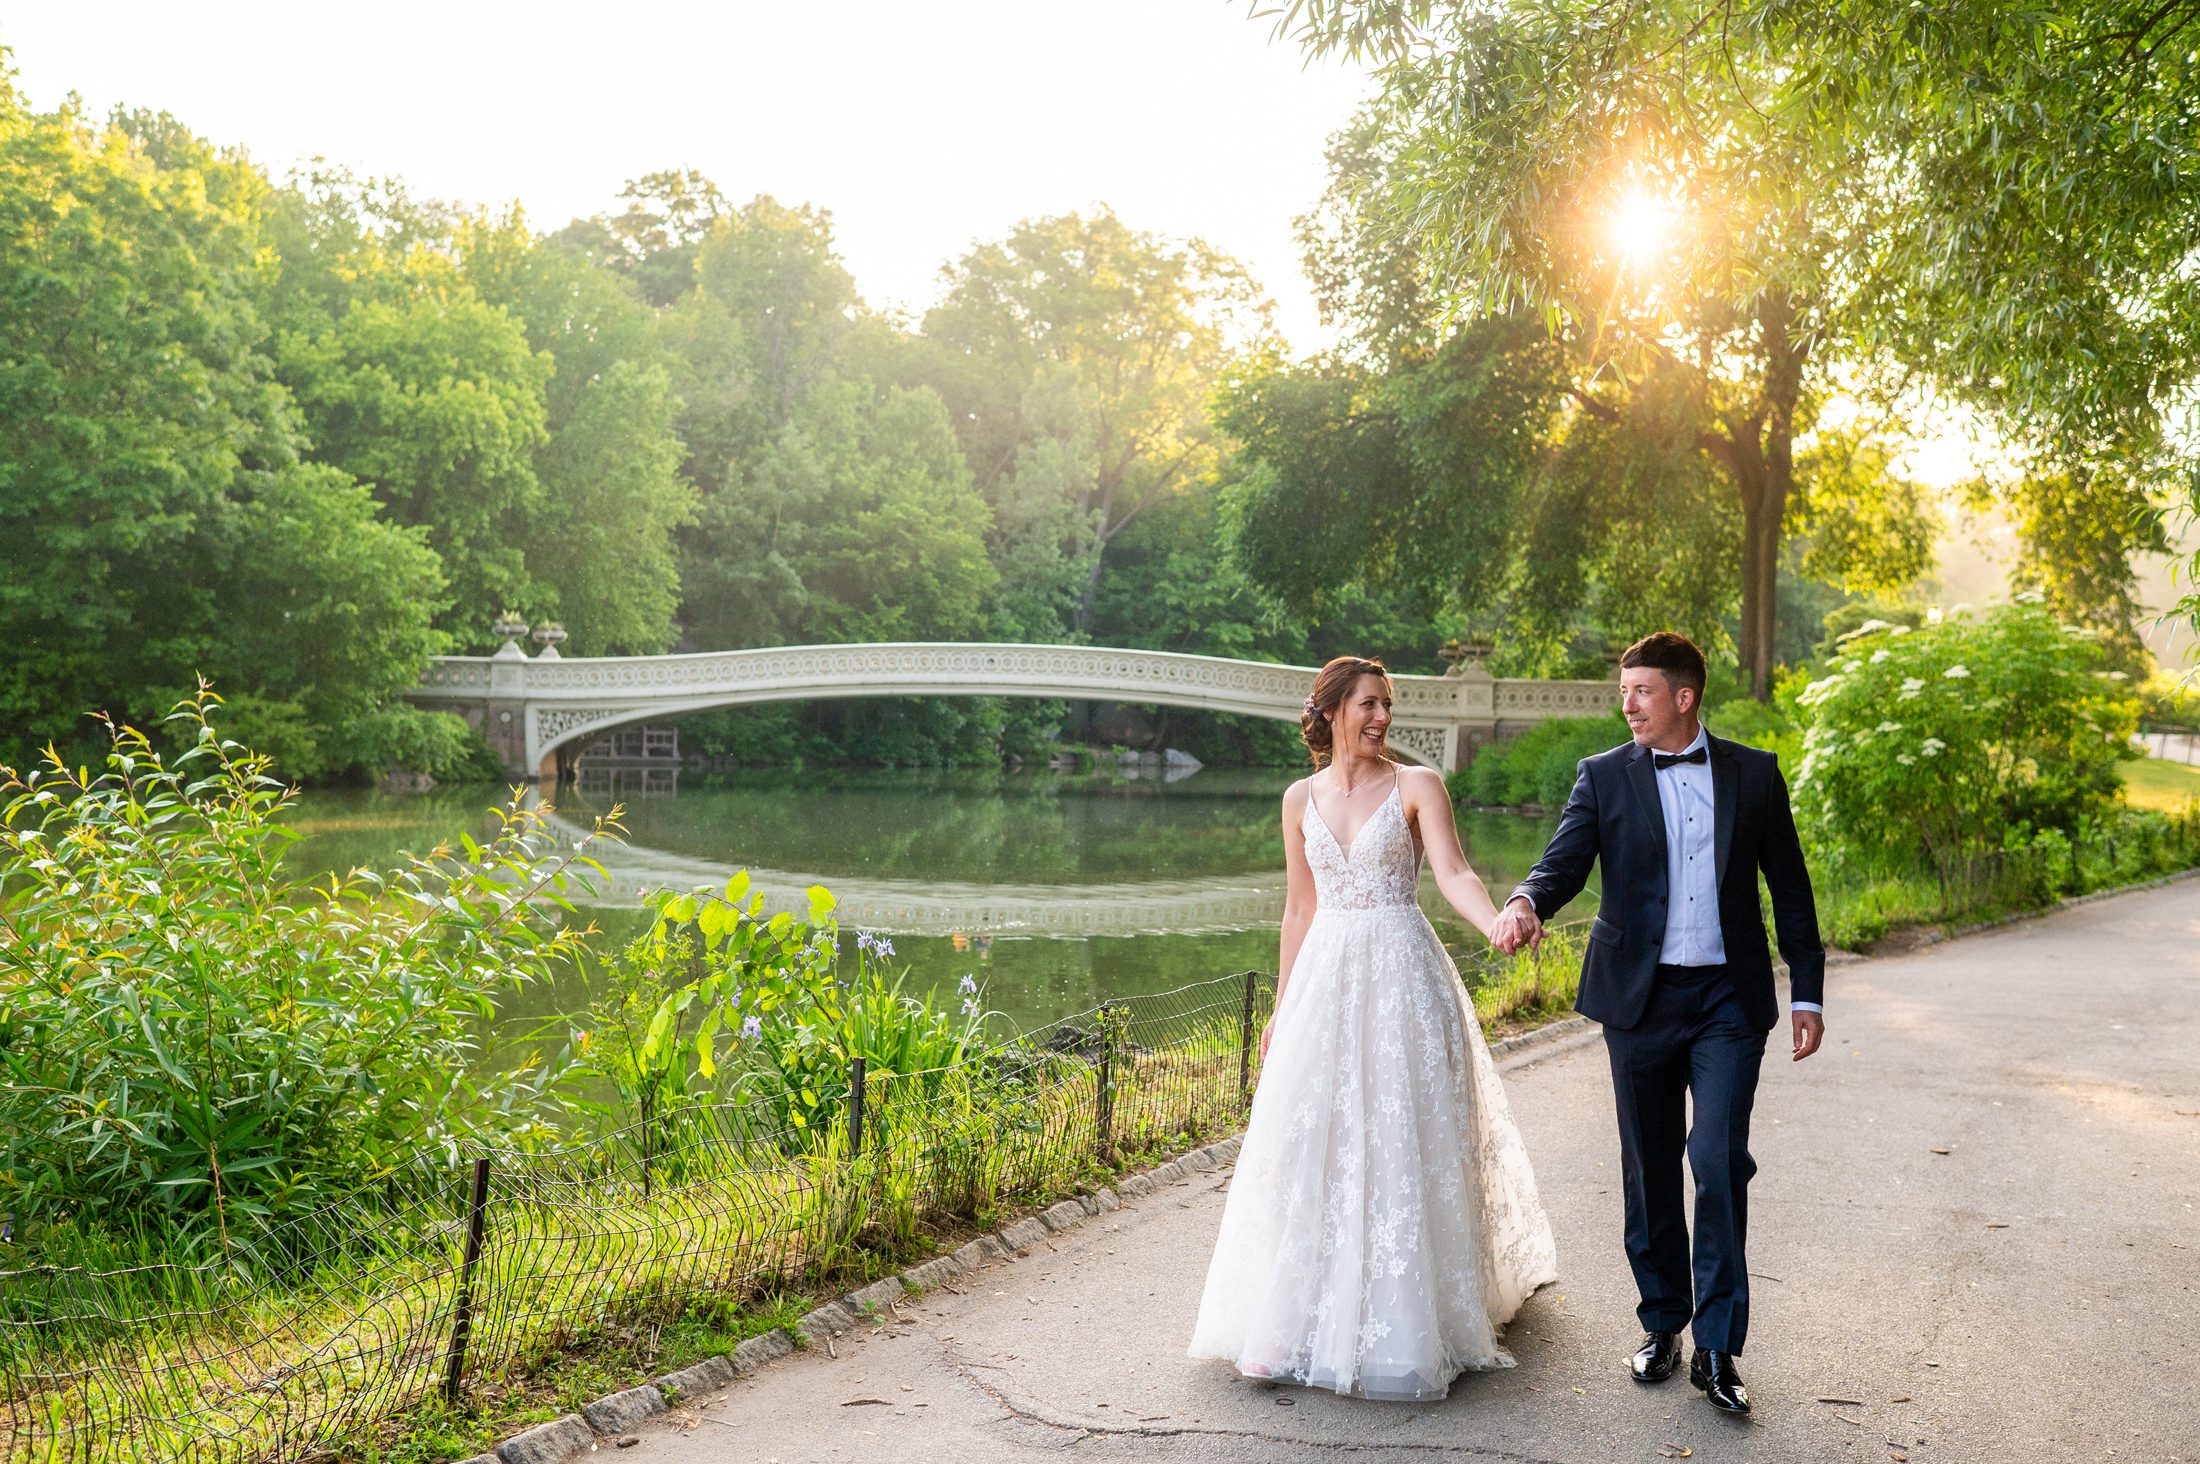 Couple walking in Central Park with Bow Bridge in the background after their sunrise wedding ceremony. 